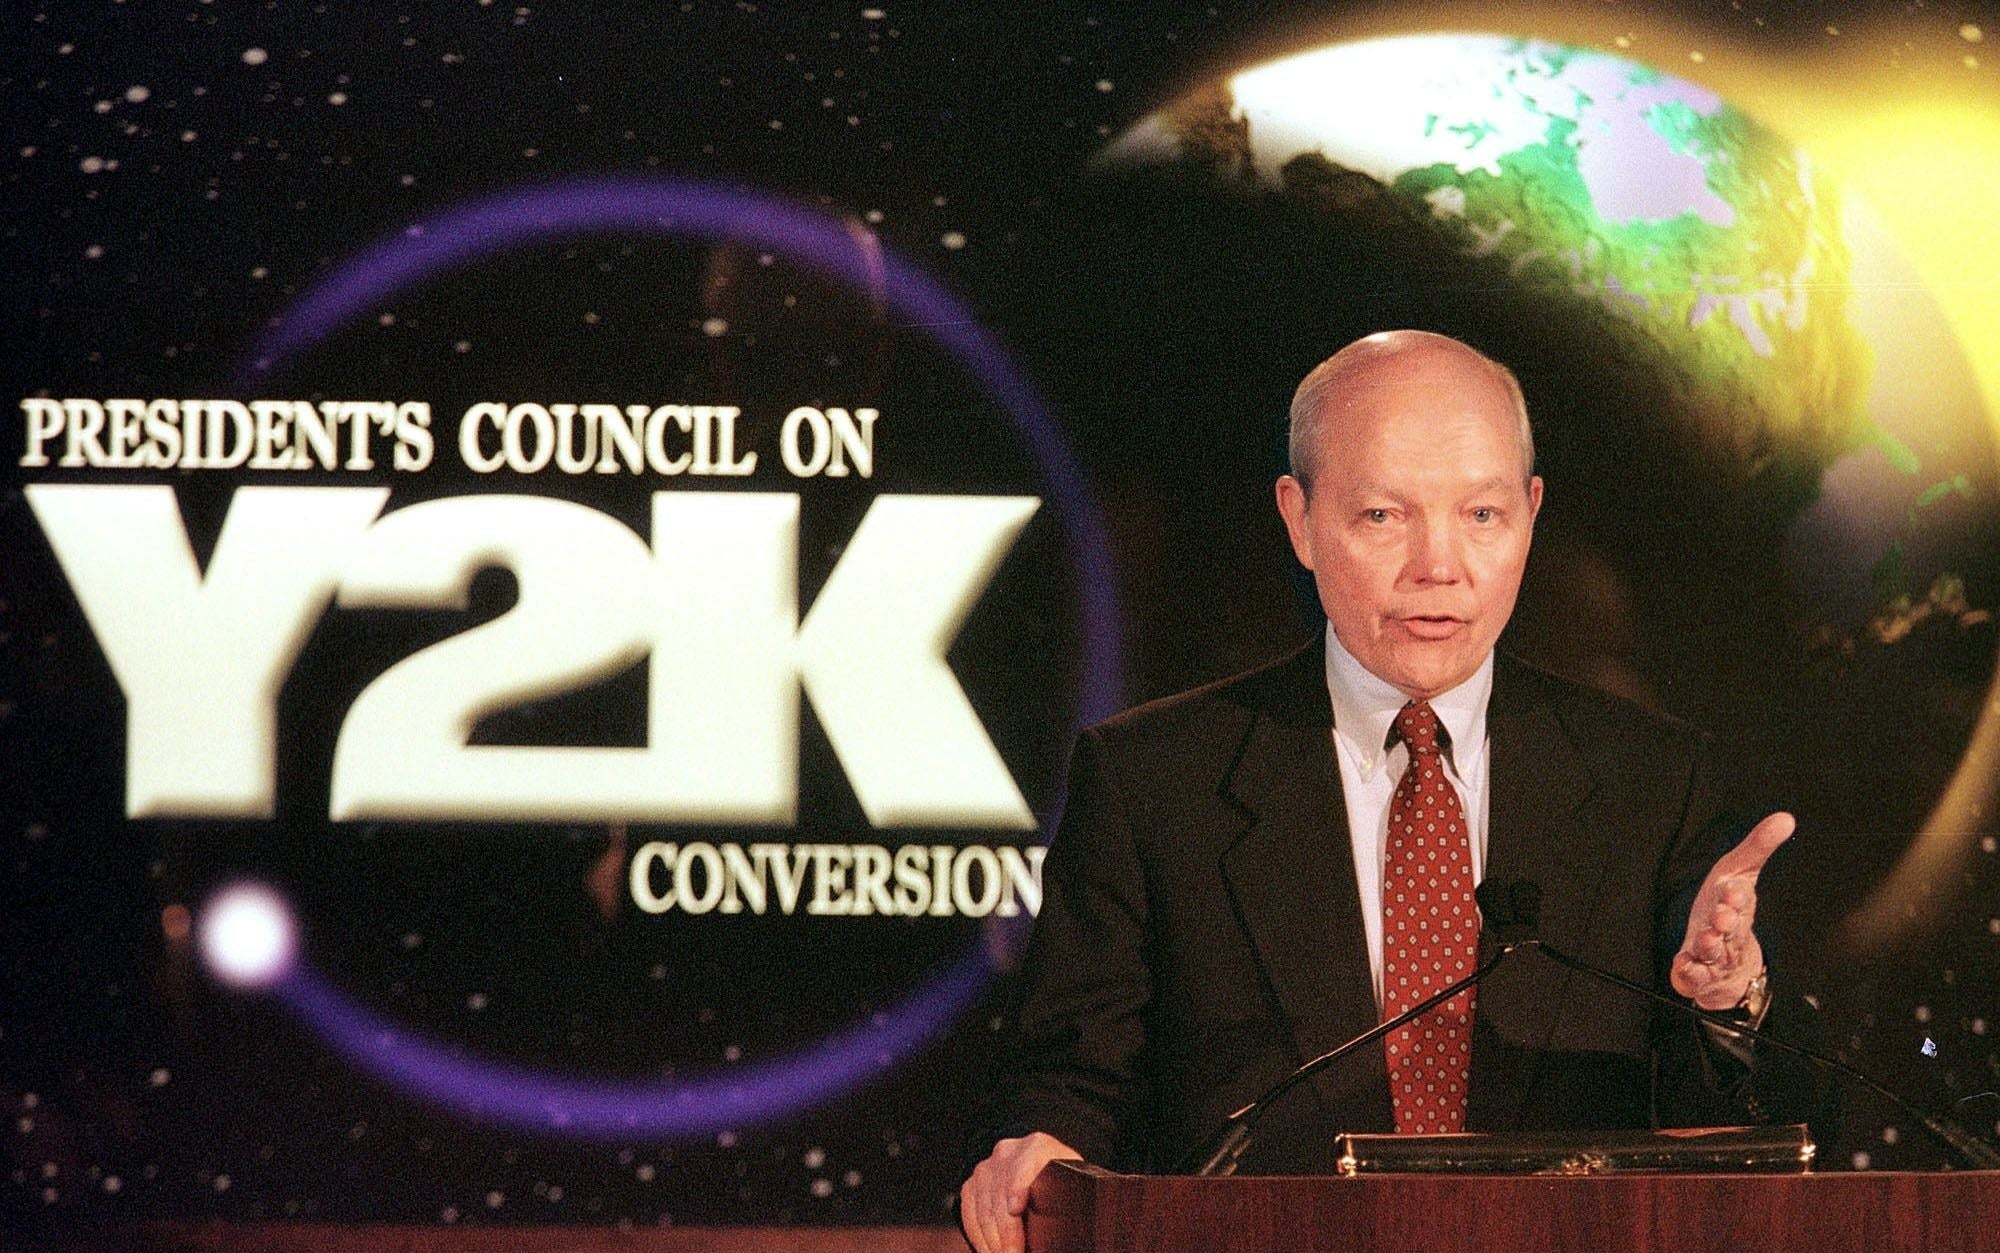 John Koskinen speaking for the president&#x27;s council on y2k conversion